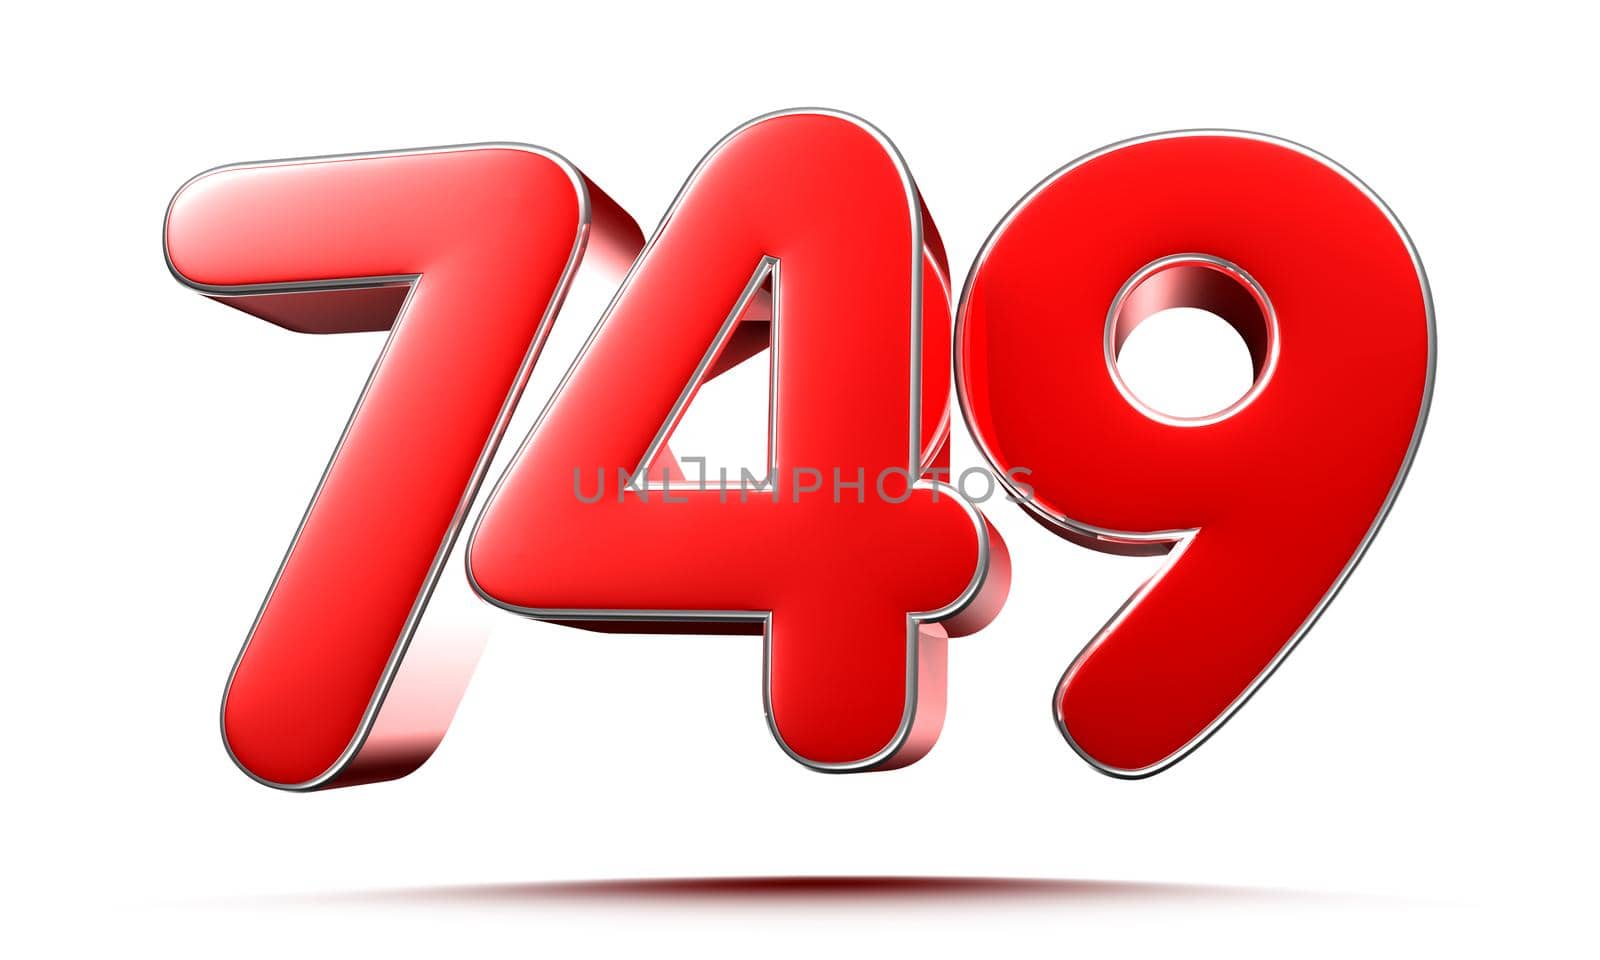 Rounded red numbers 749 on white background 3D illustration with clipping path by thitimontoyai